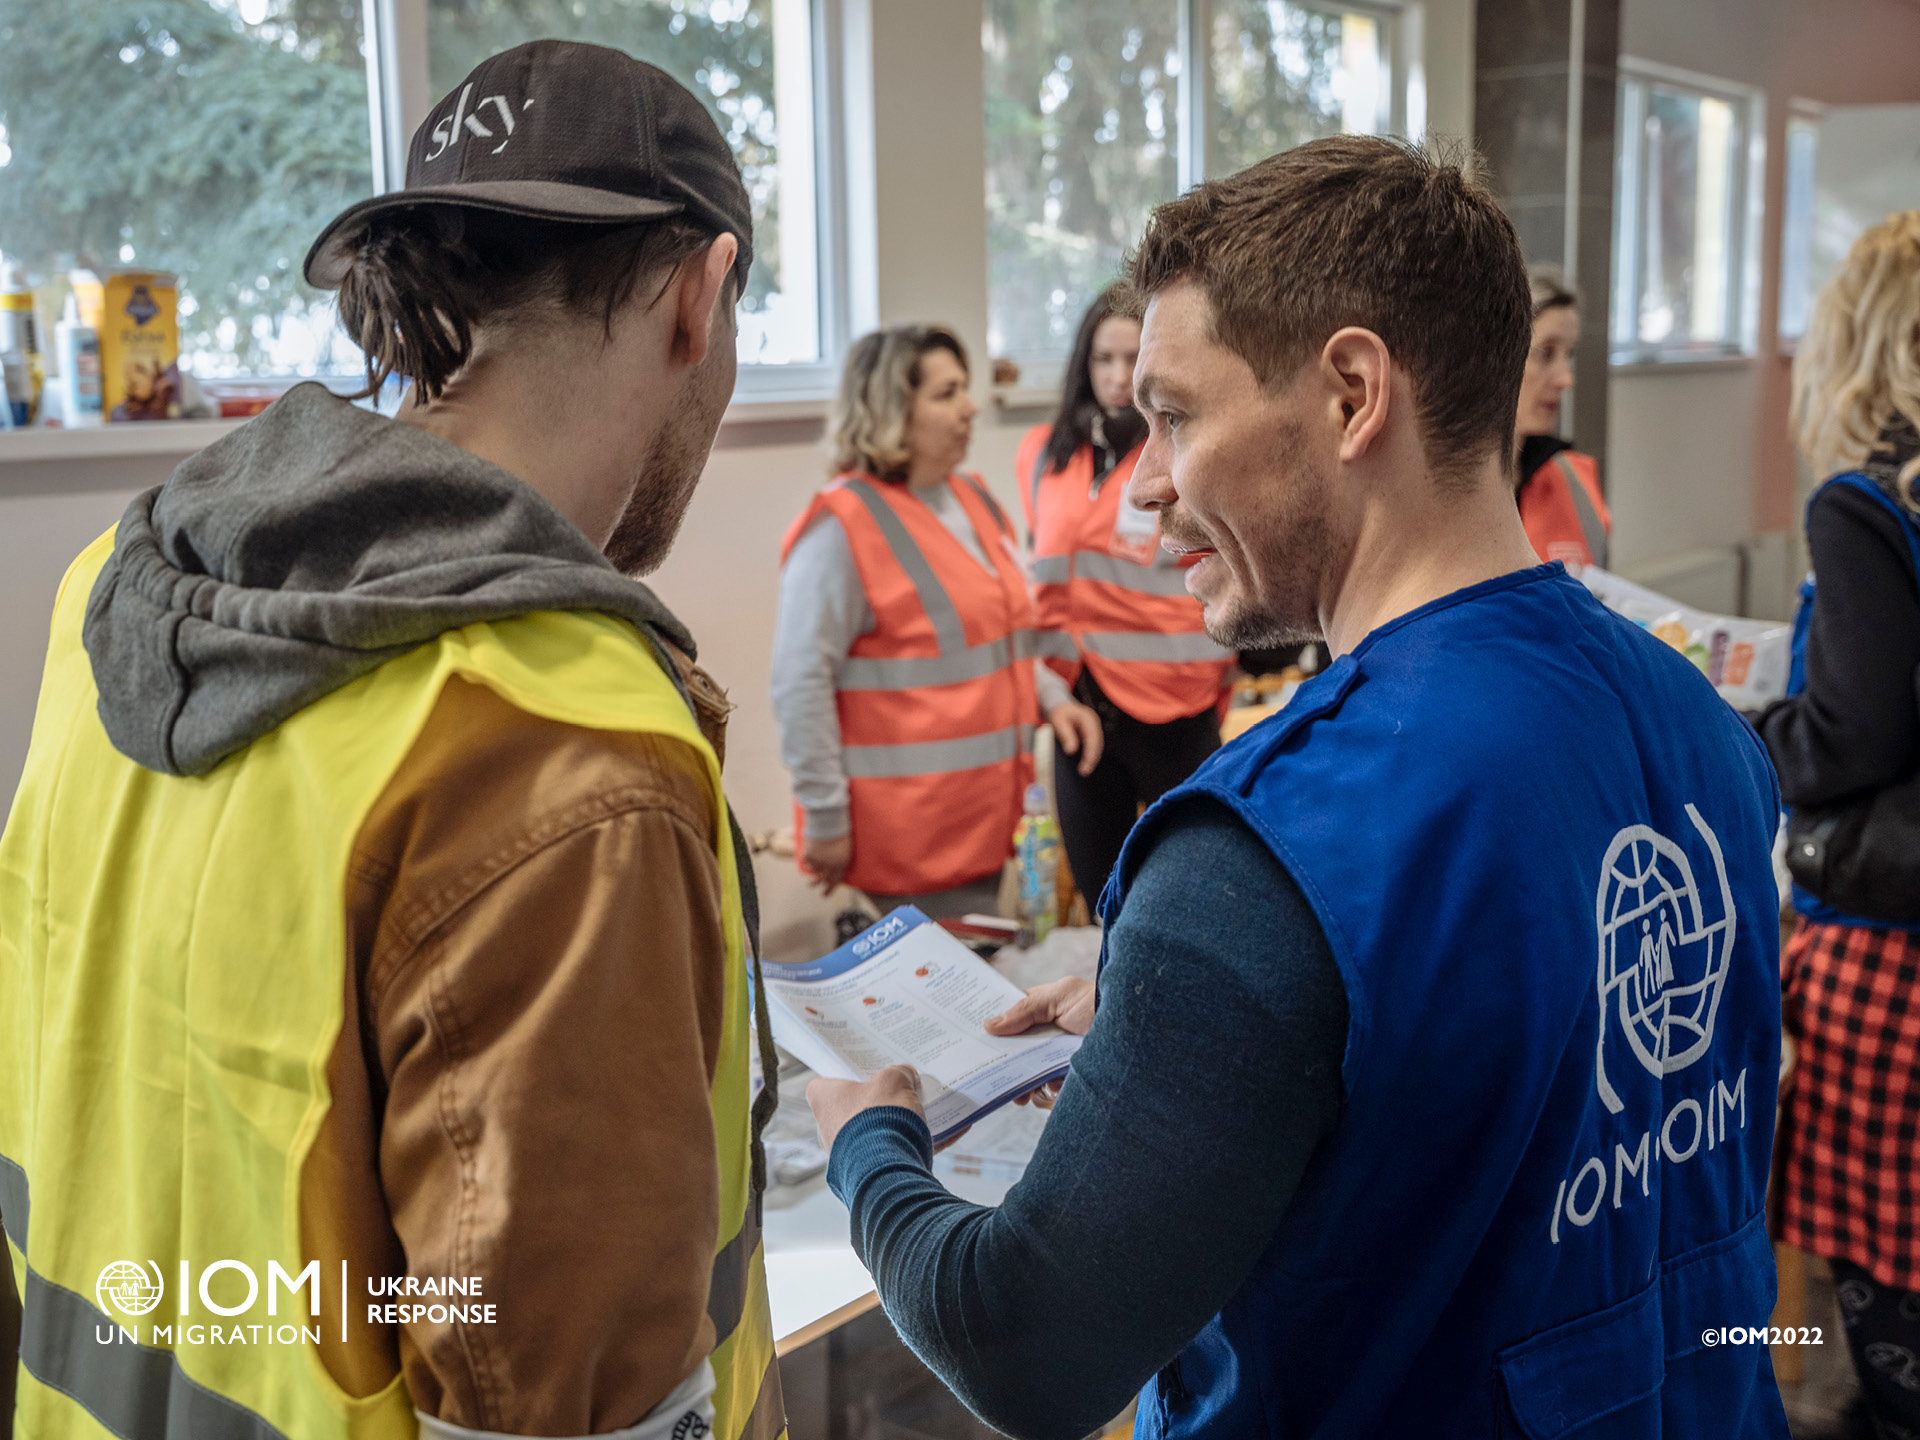  IOM provides counselling, builds capacities of professionals and disseminates information leaflets and information cards with relevant preventive information and contact details to reduce the risk of human trafficking. Photo © International Organization for Migration (IOM) 2022.